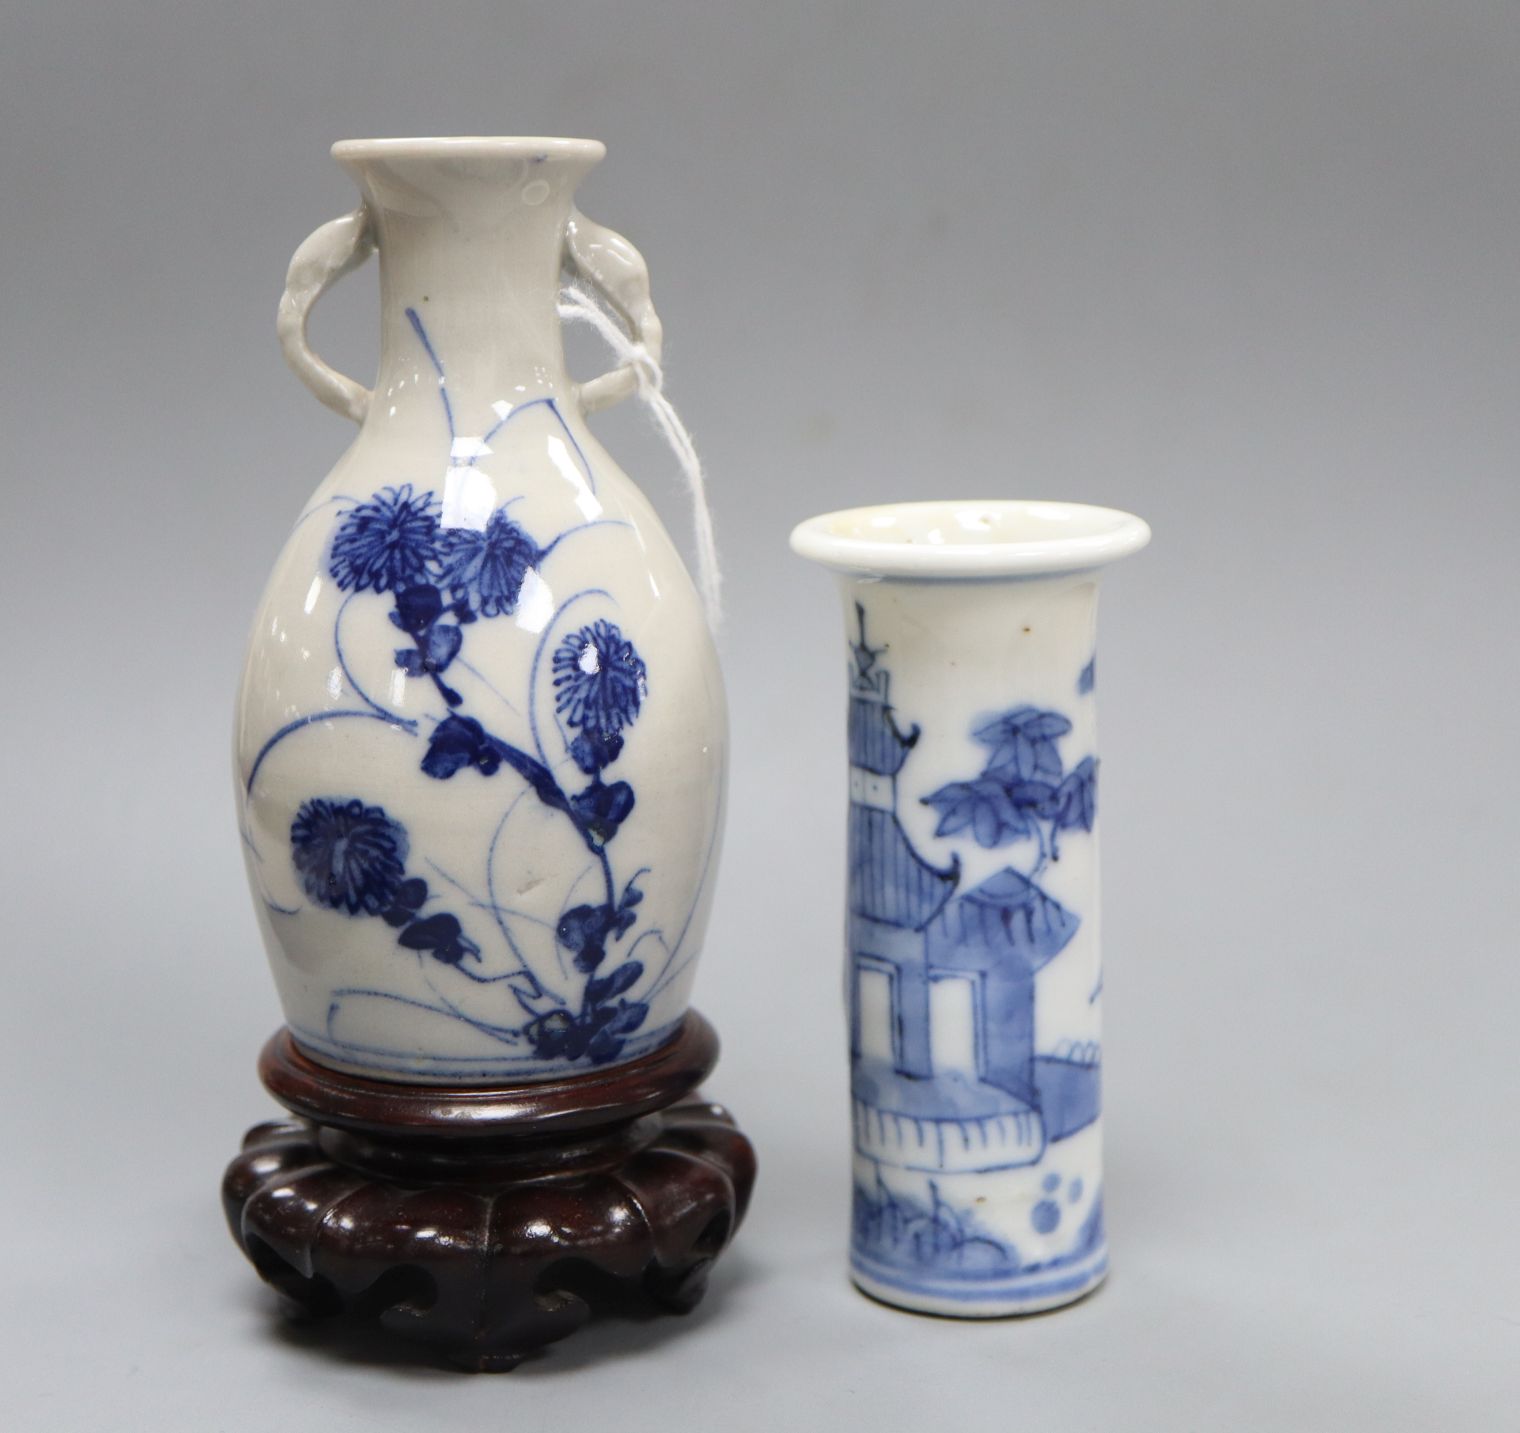 A 19th century Chinese blue and white 'Hu' vase and a similar miniature sleeve vase, and a